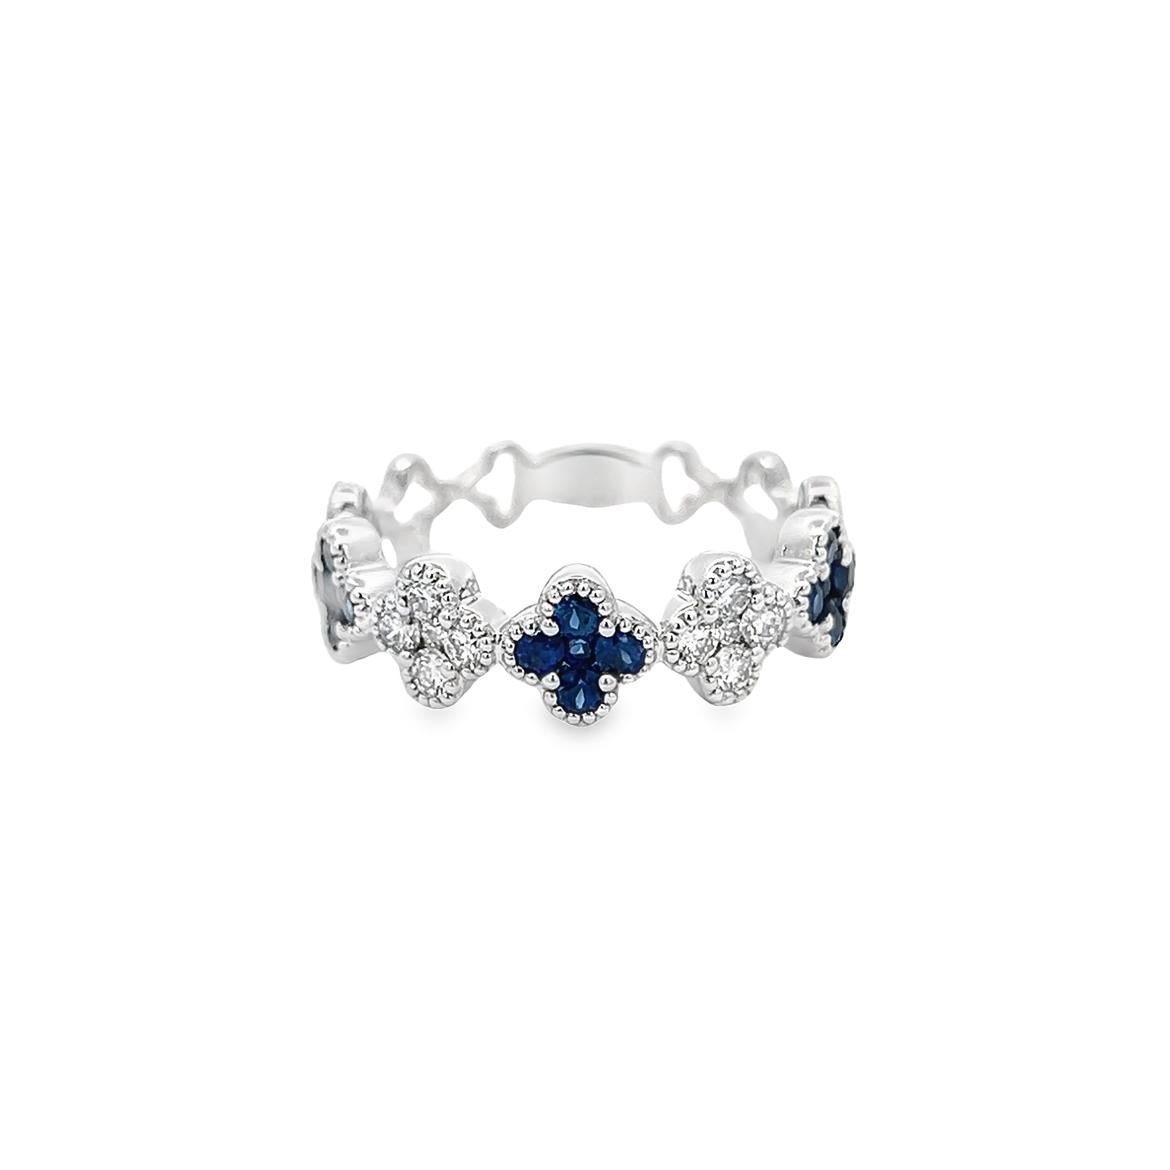 This are beautiful ladies rings with a flower shape design, each of the petals adorned with a variety of gemstones some of them alternating diamonds for a better enhancement. We show details on each stone of the rings bellow. 

Highlights:
1.